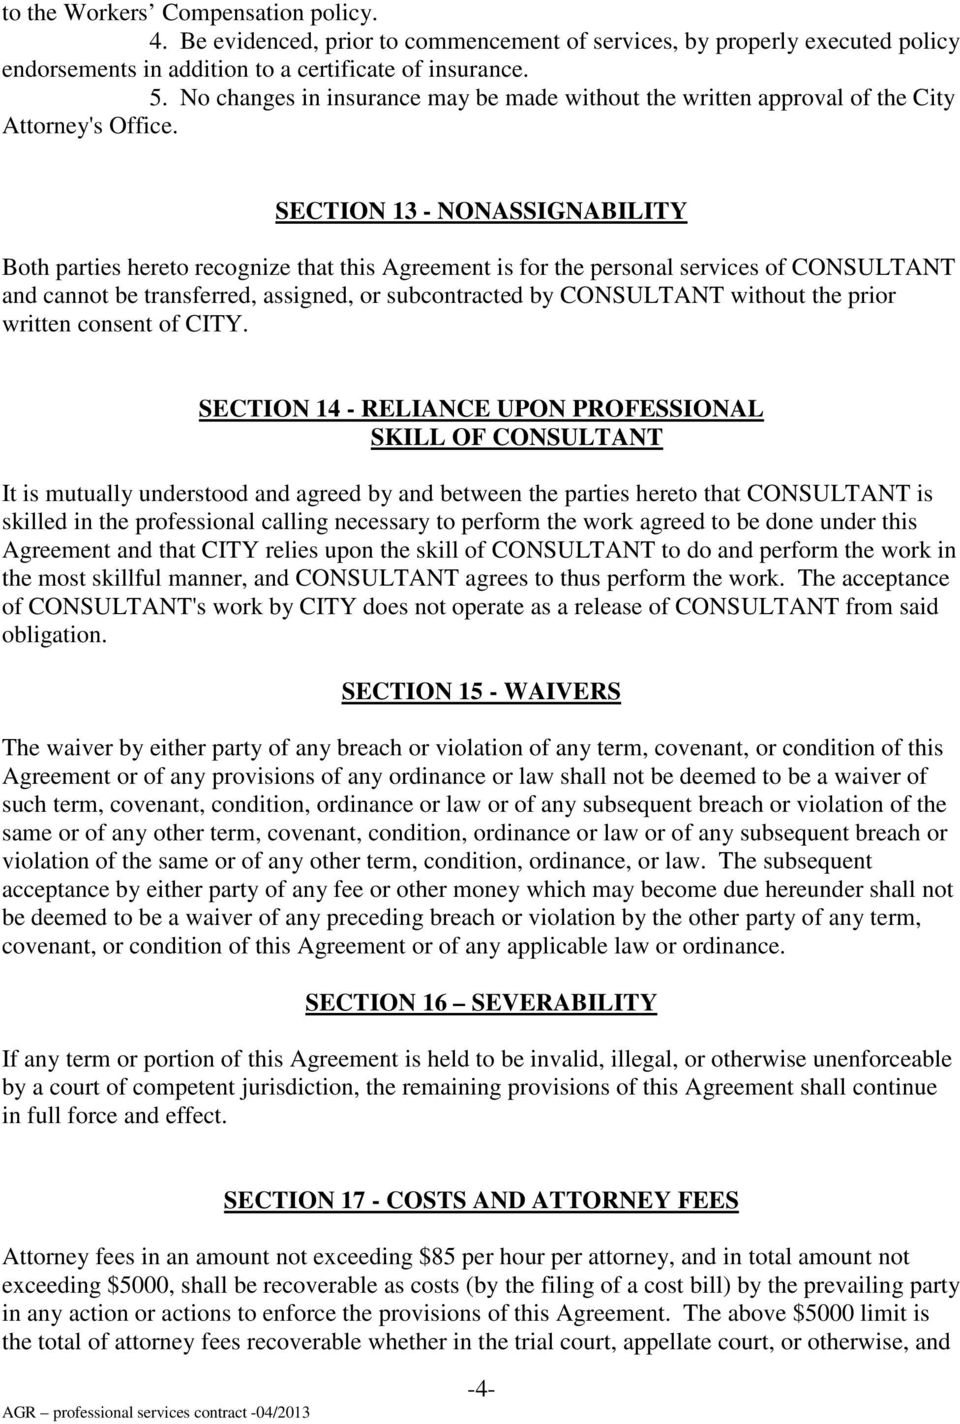 SECTION 13 - NONASSIGNABILITY Both parties hereto recognize that this Agreement is for the personal services of CONSULTANT and cannot be transferred, assigned, or subcontracted by CONSULTANT without